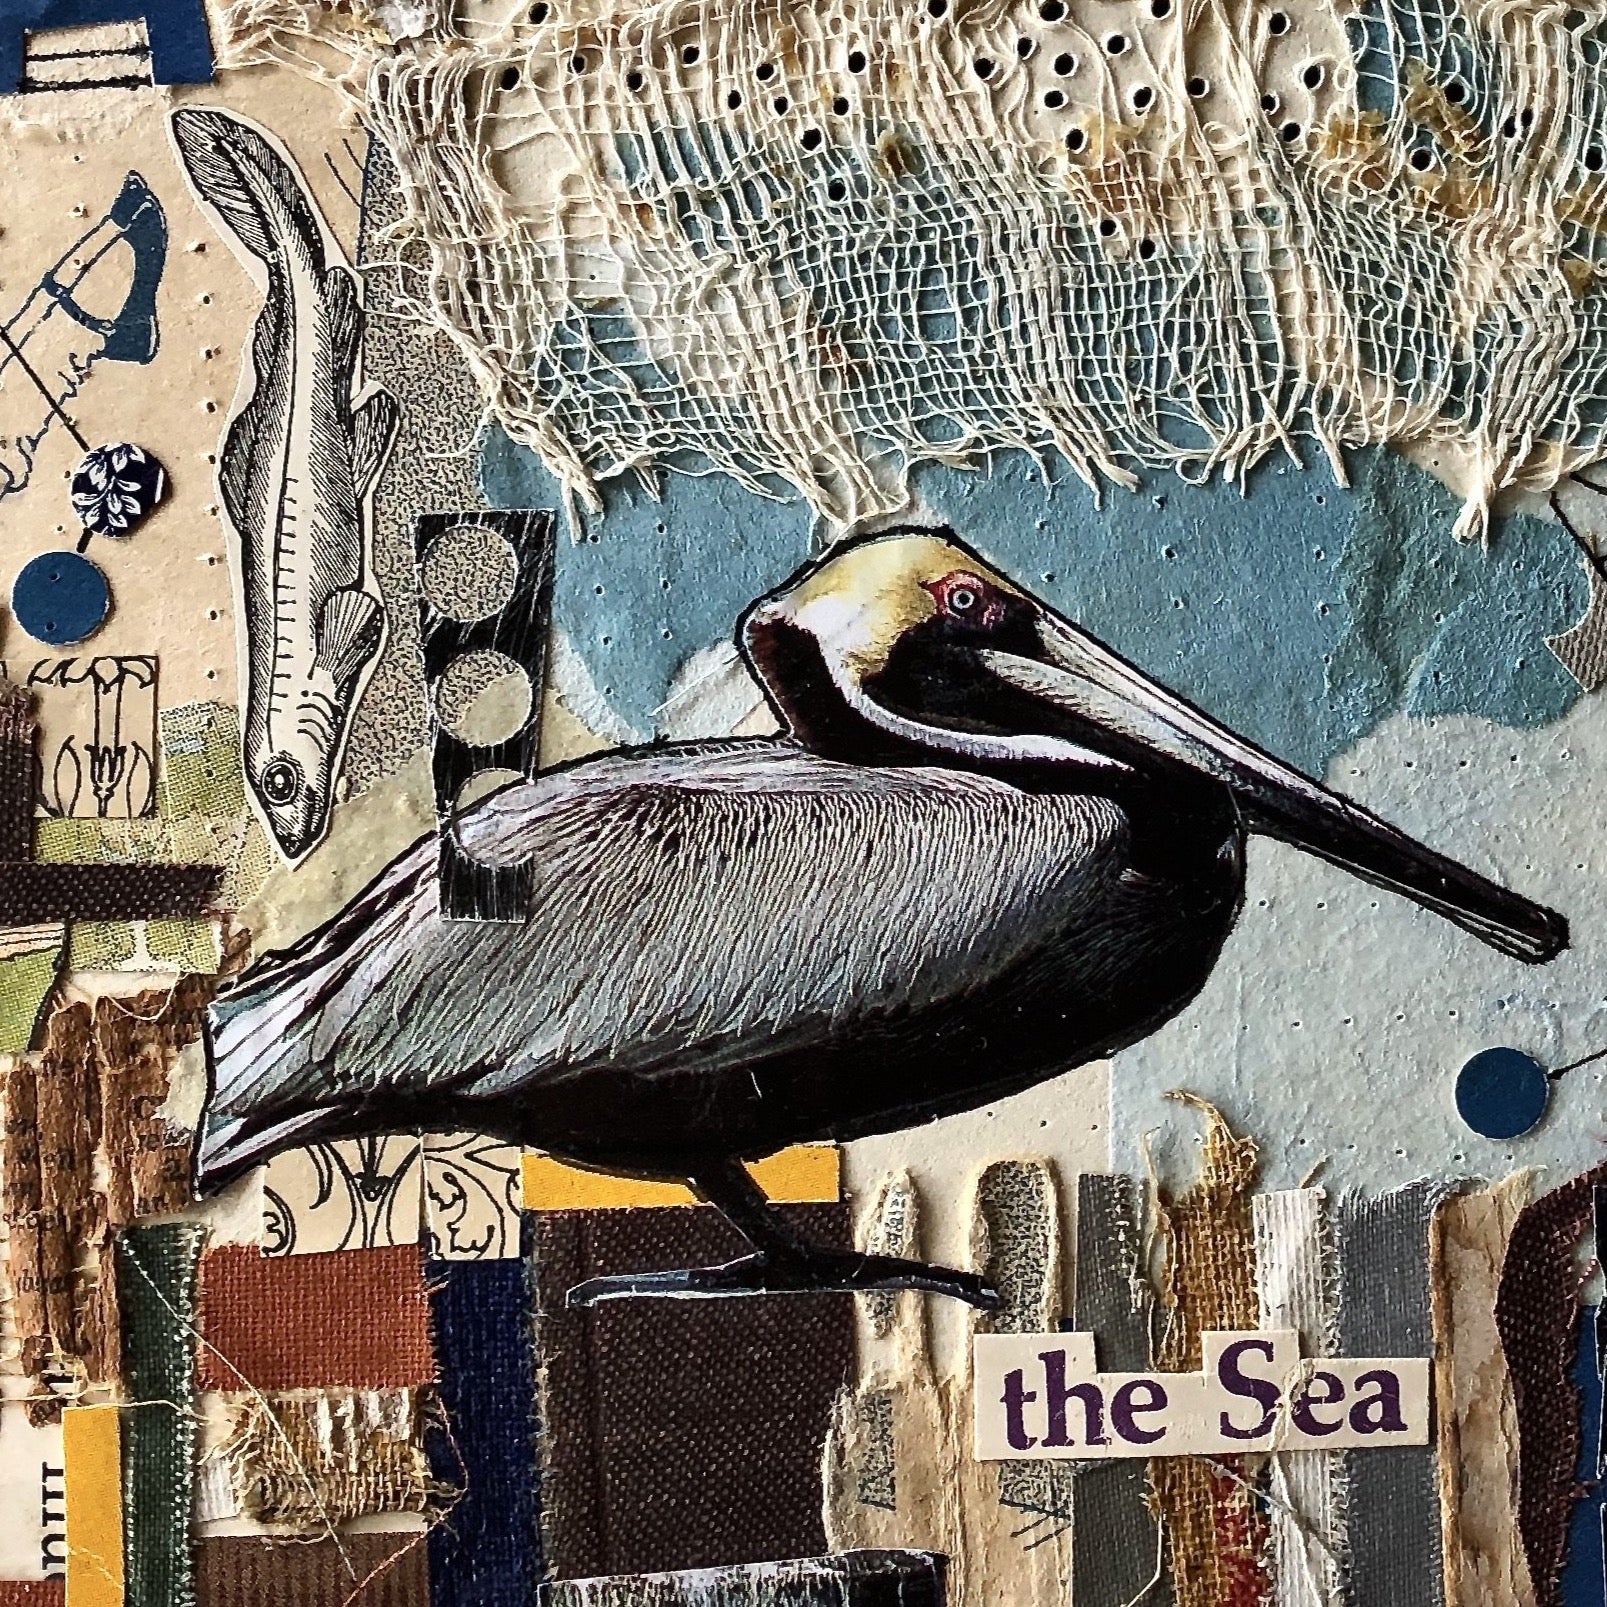 Old Book Mixed Media Collage, 'Pelican Life'